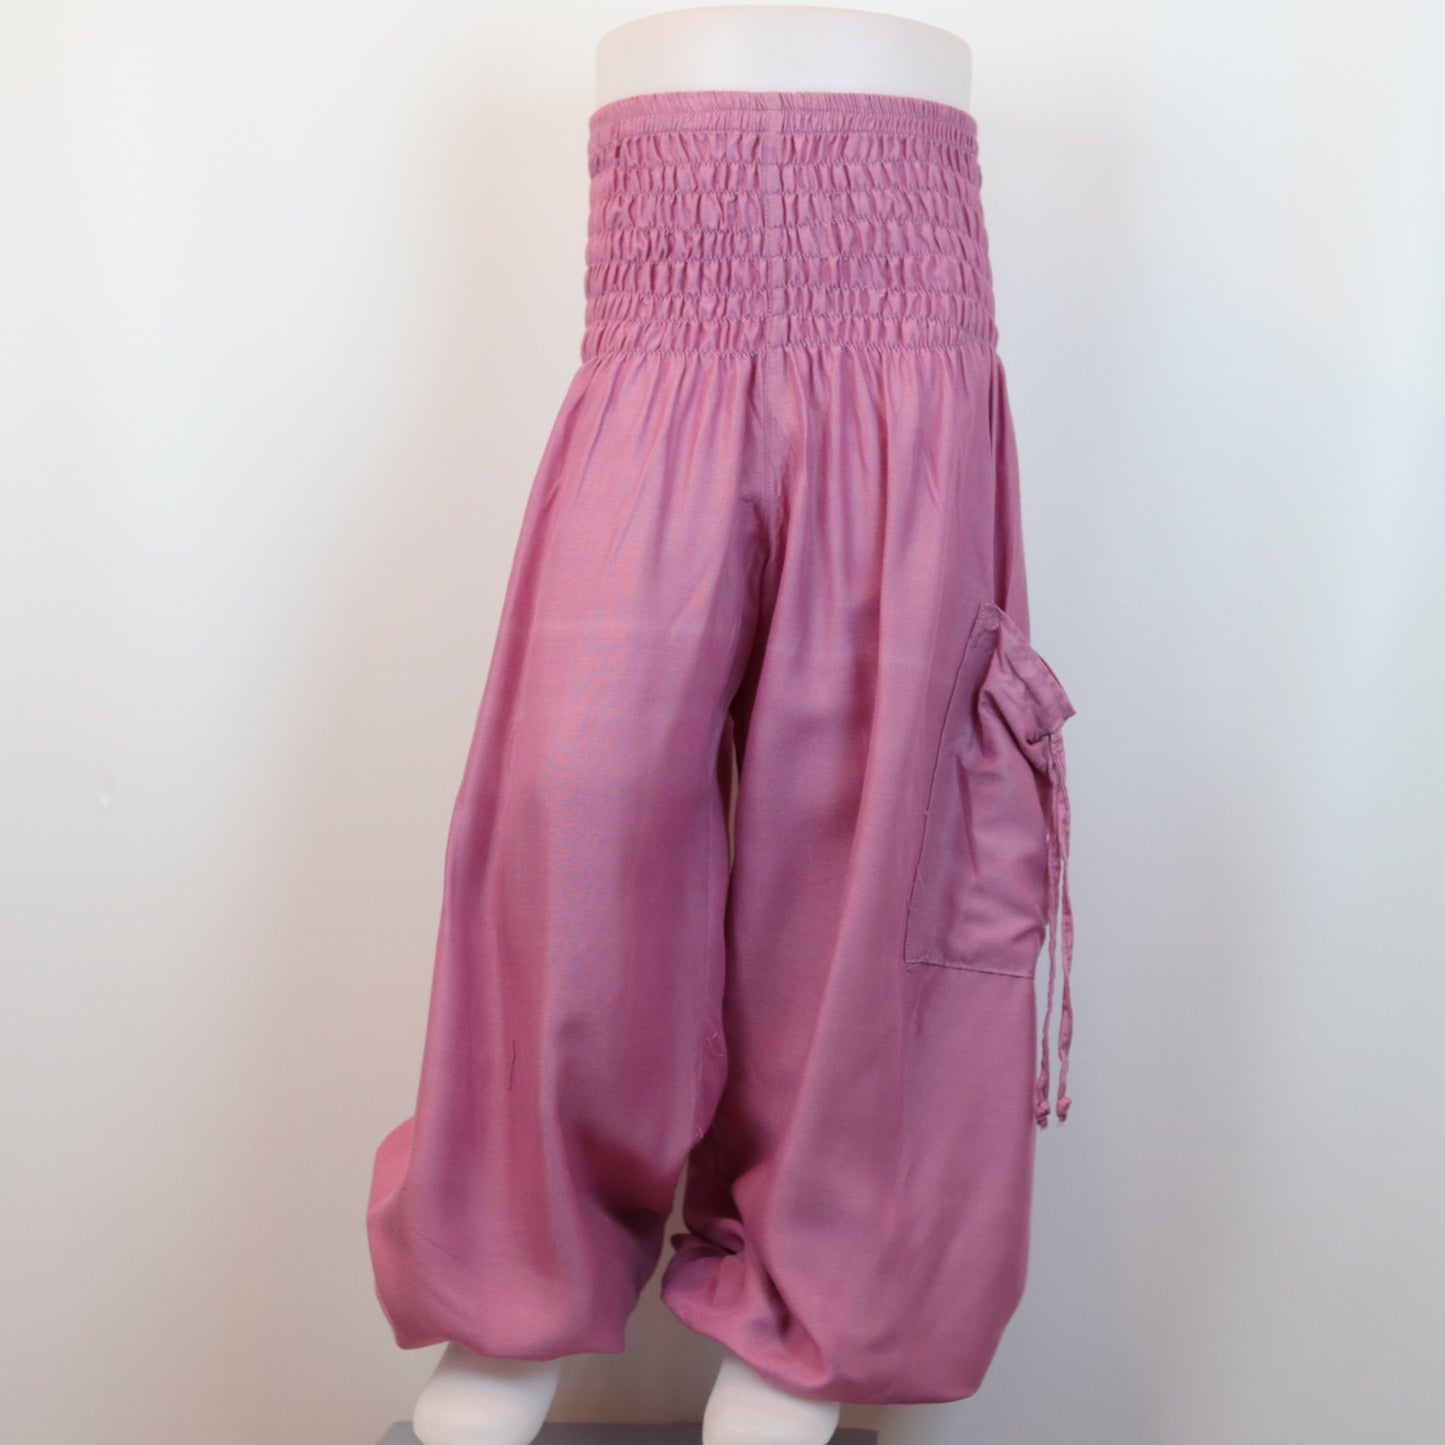 plain kids alibaba pants size 1 one- fits 0 to 2 year old